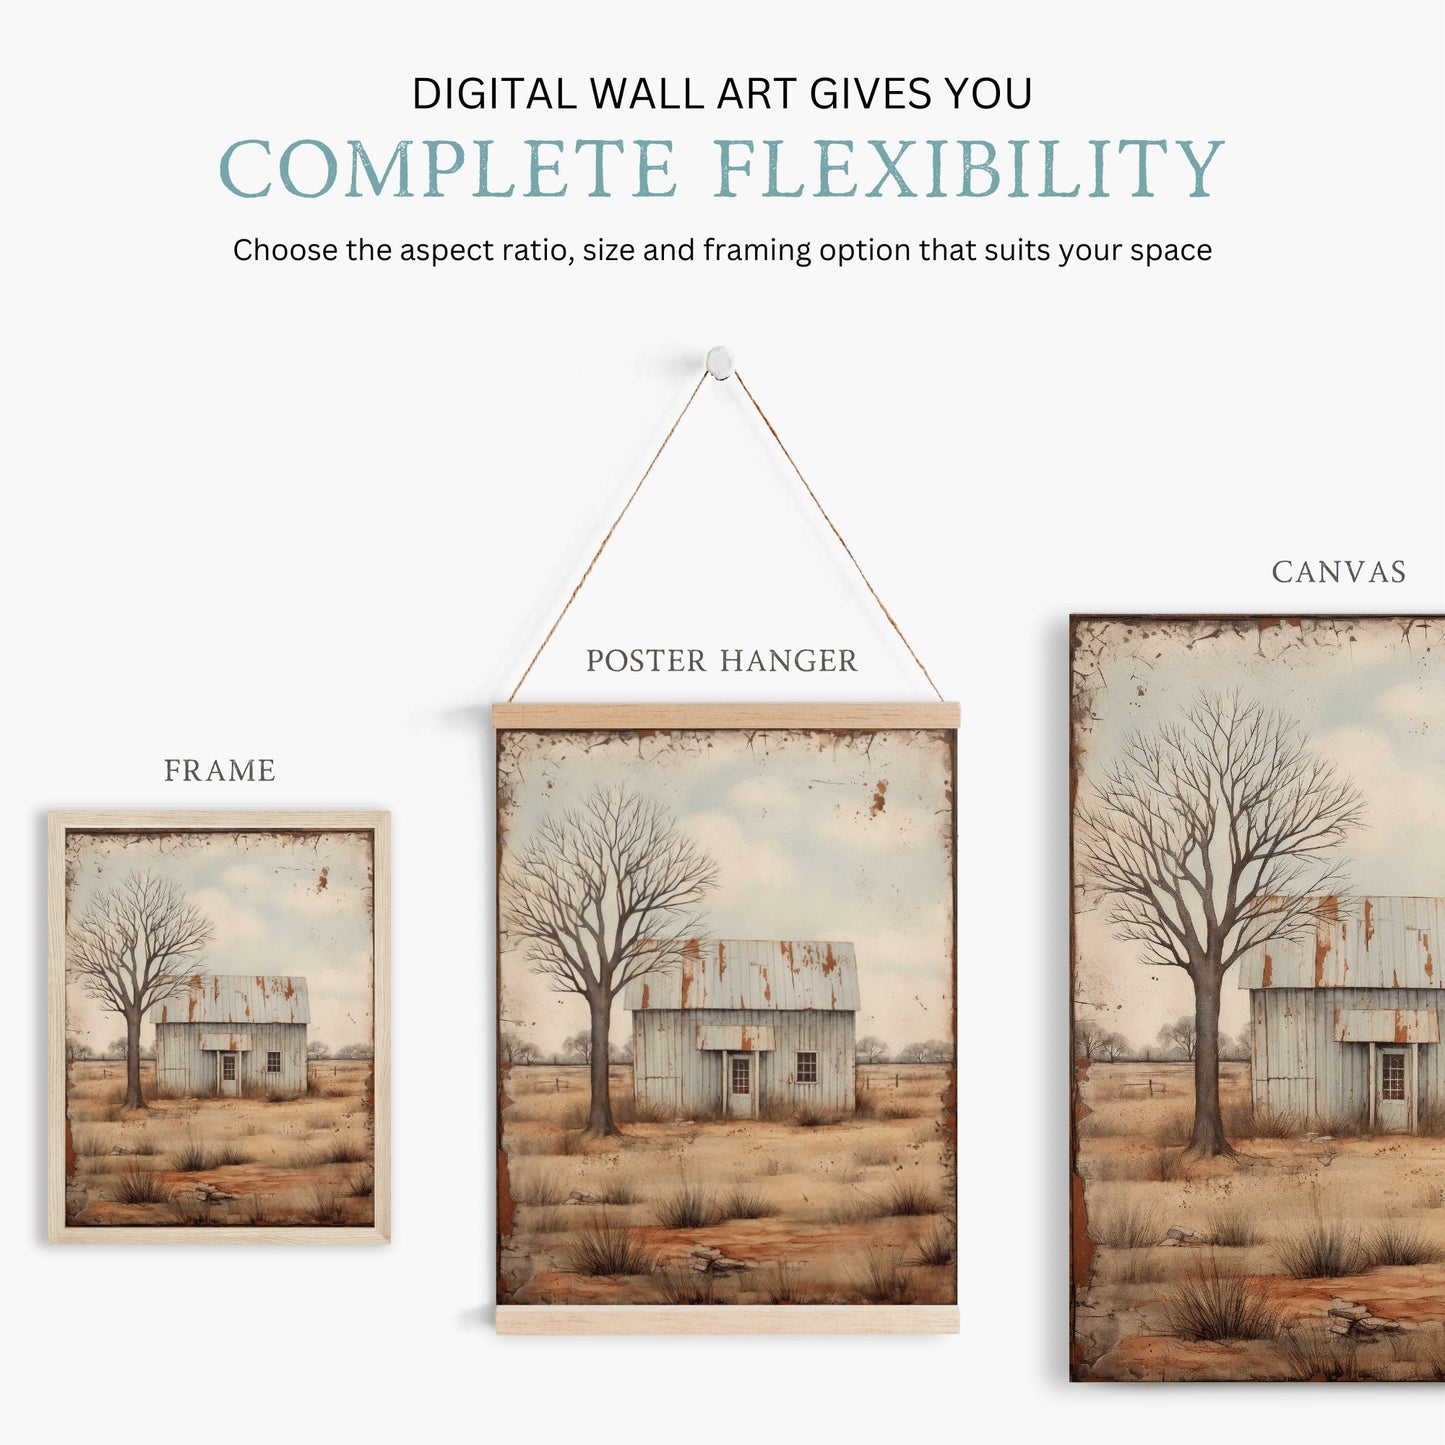 Little Old House Countryside Print, Rustic Farmhouse Wall Decor, Vintage Country Home Decor, Country Cottage Print, DIGITAL Printable Art